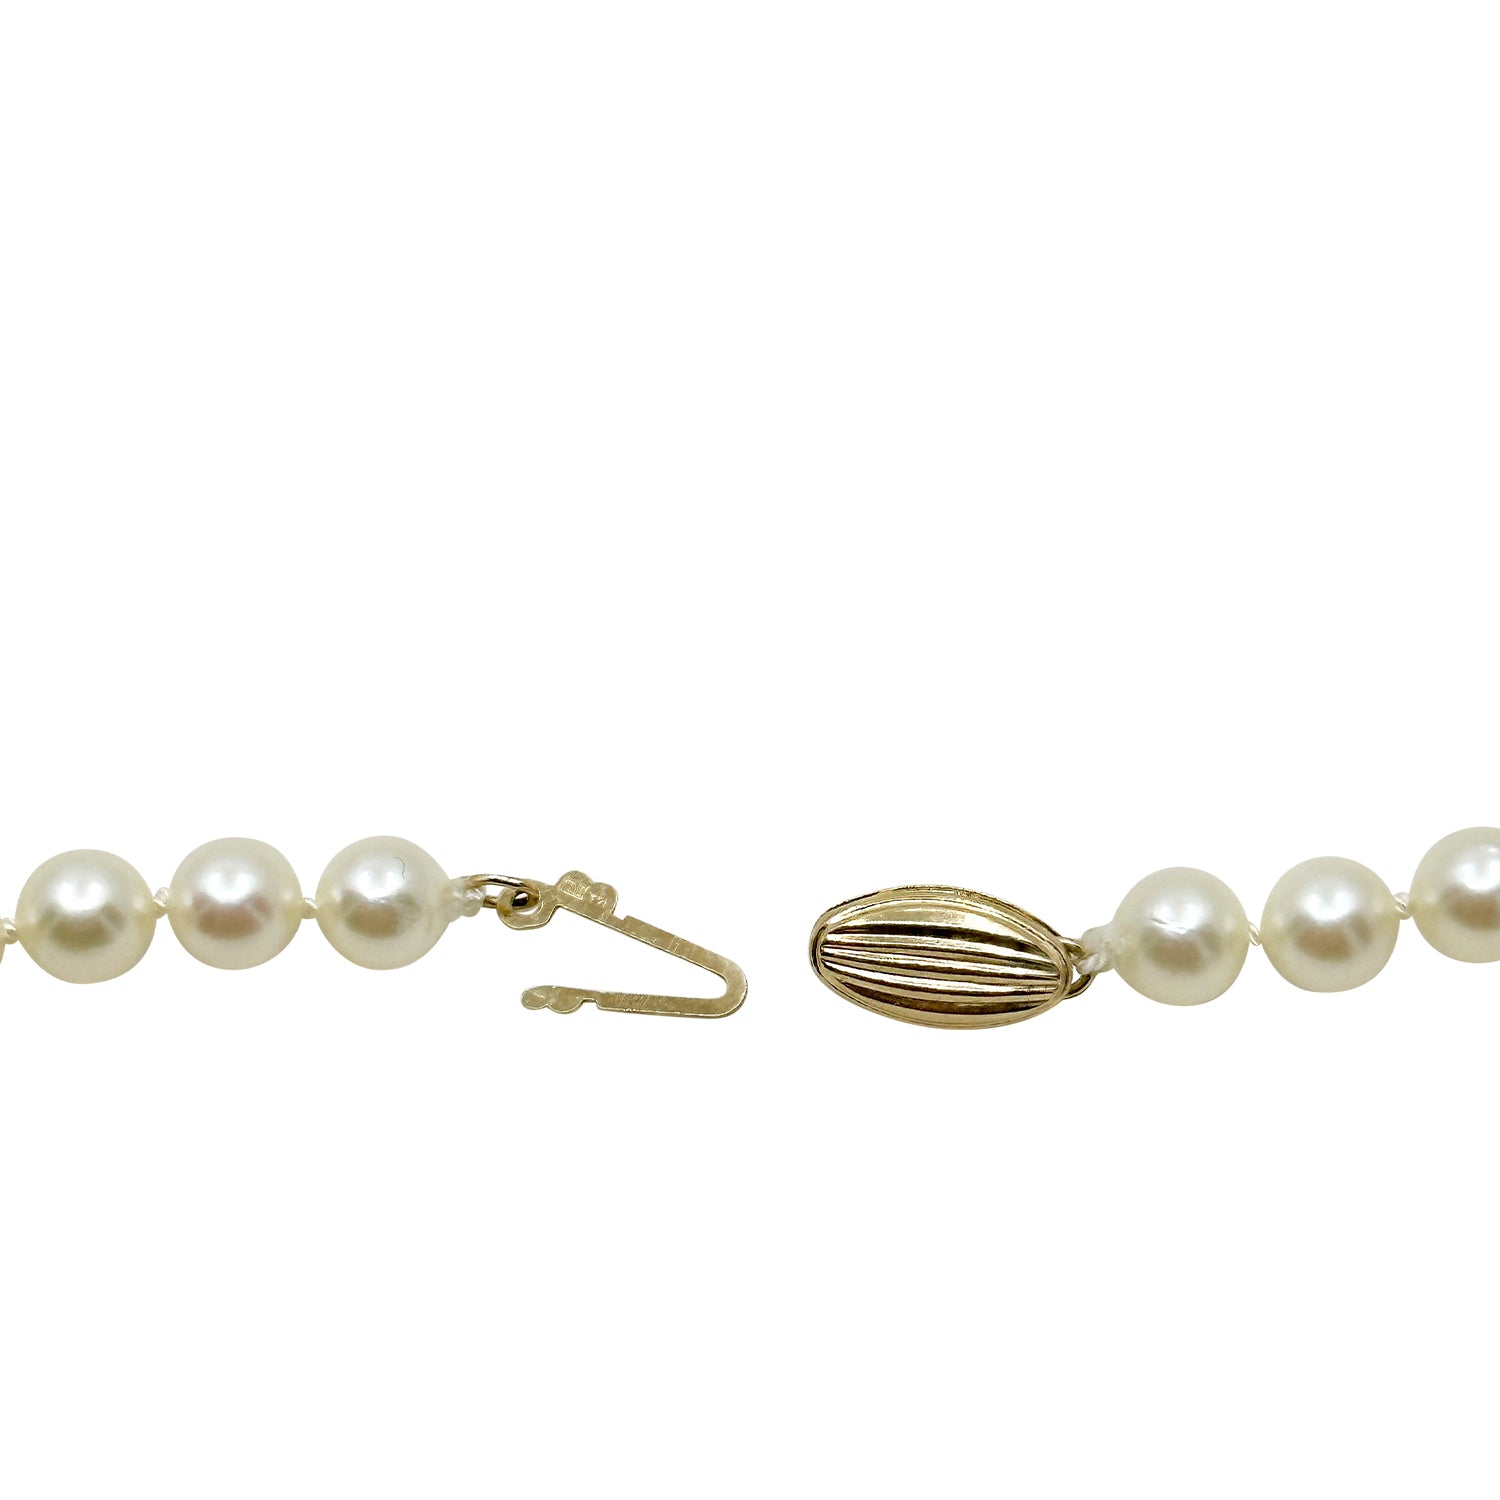 Matinee Strand Mikimoto Blue Lagoon Japanese Cultured Akoya Pearl Necklace - 14K Yellow Gold 24 Inch